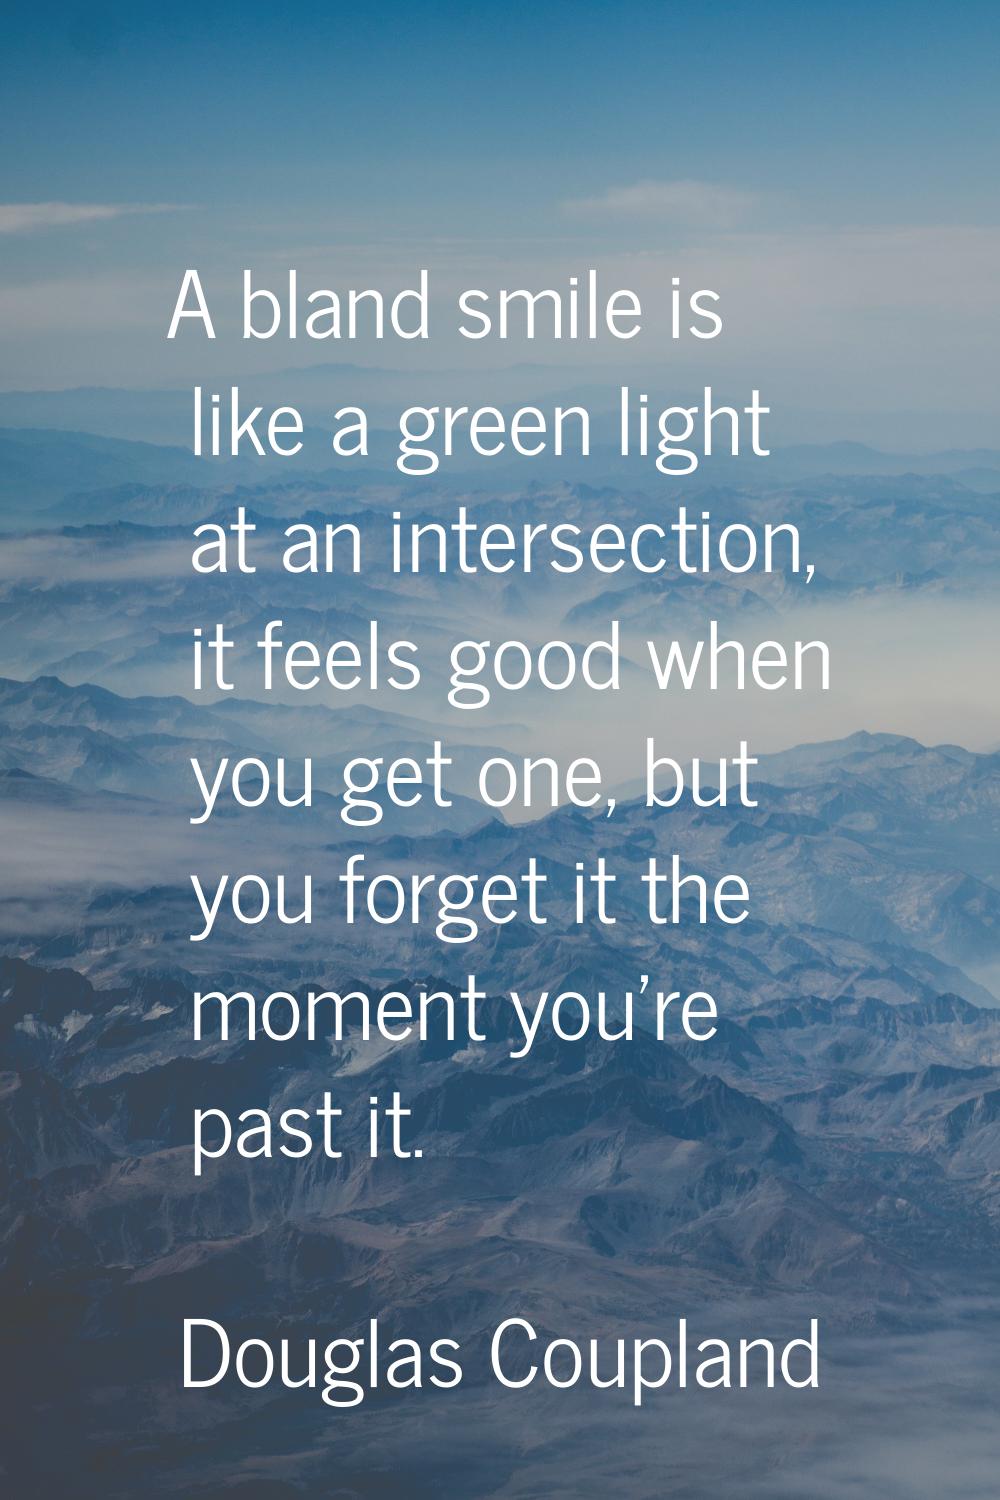 A bland smile is like a green light at an intersection, it feels good when you get one, but you for